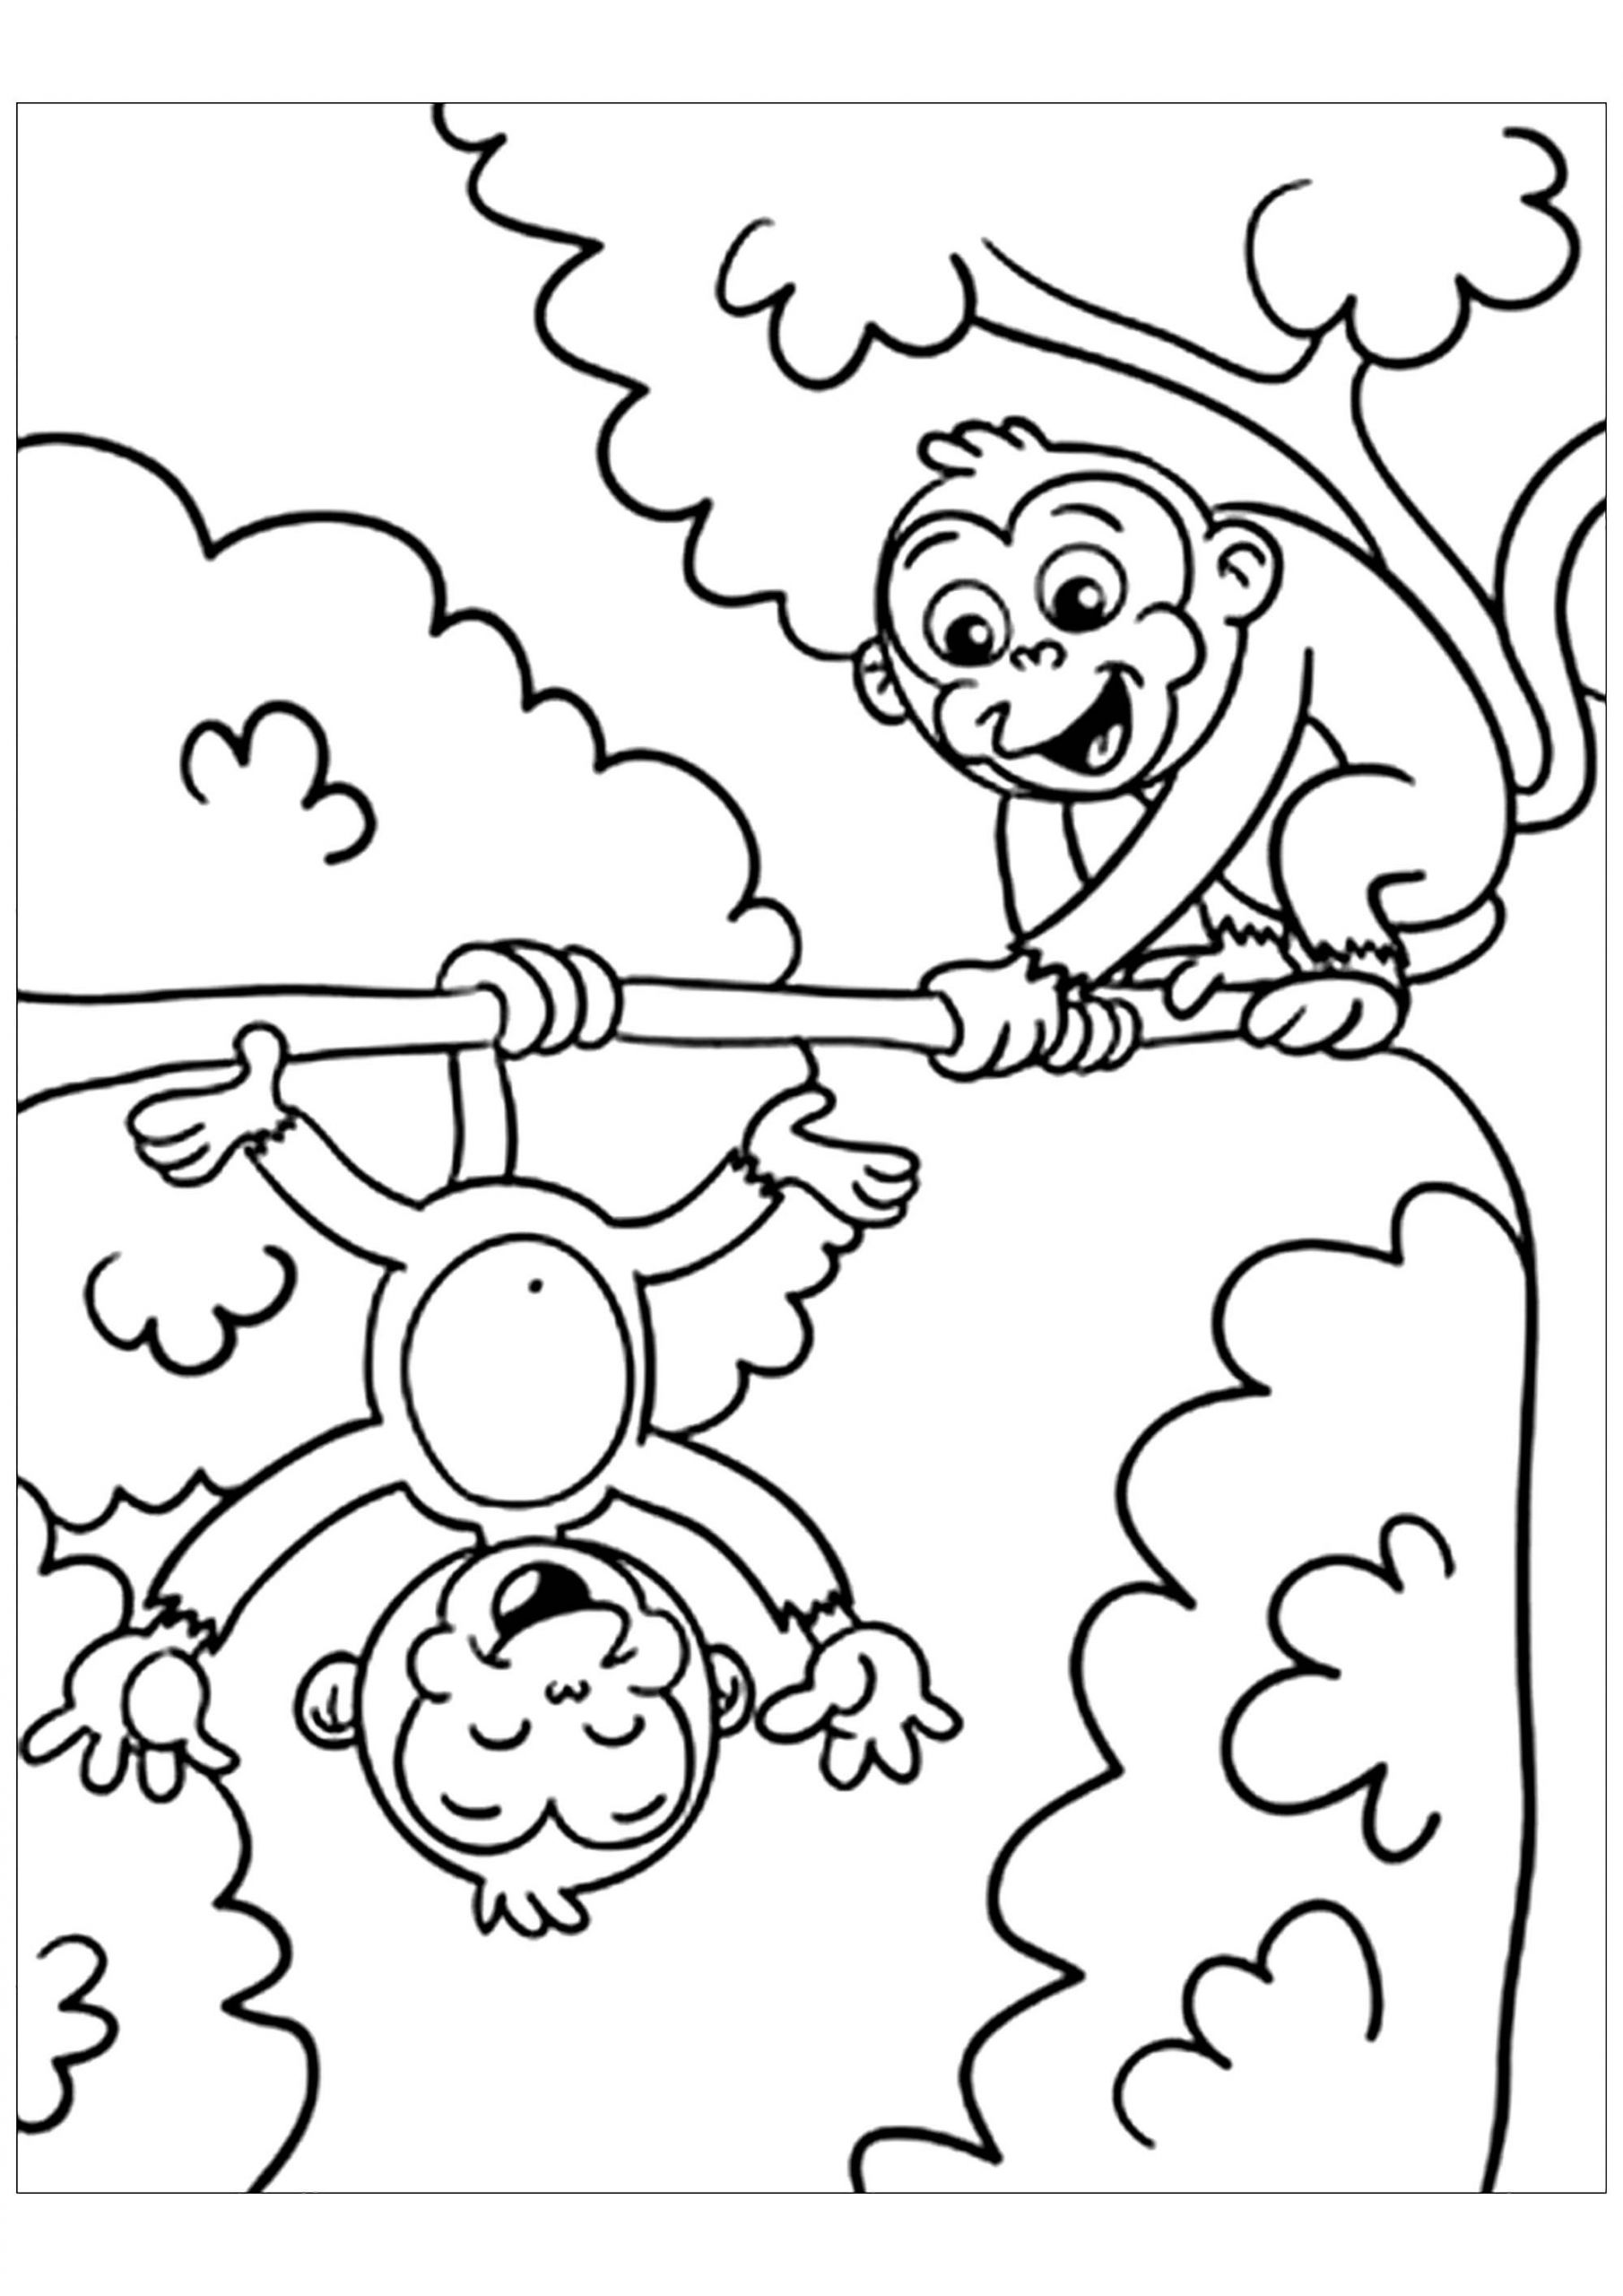 Kids Coloring Print
 Monkeys to print for free Monkeys Kids Coloring Pages